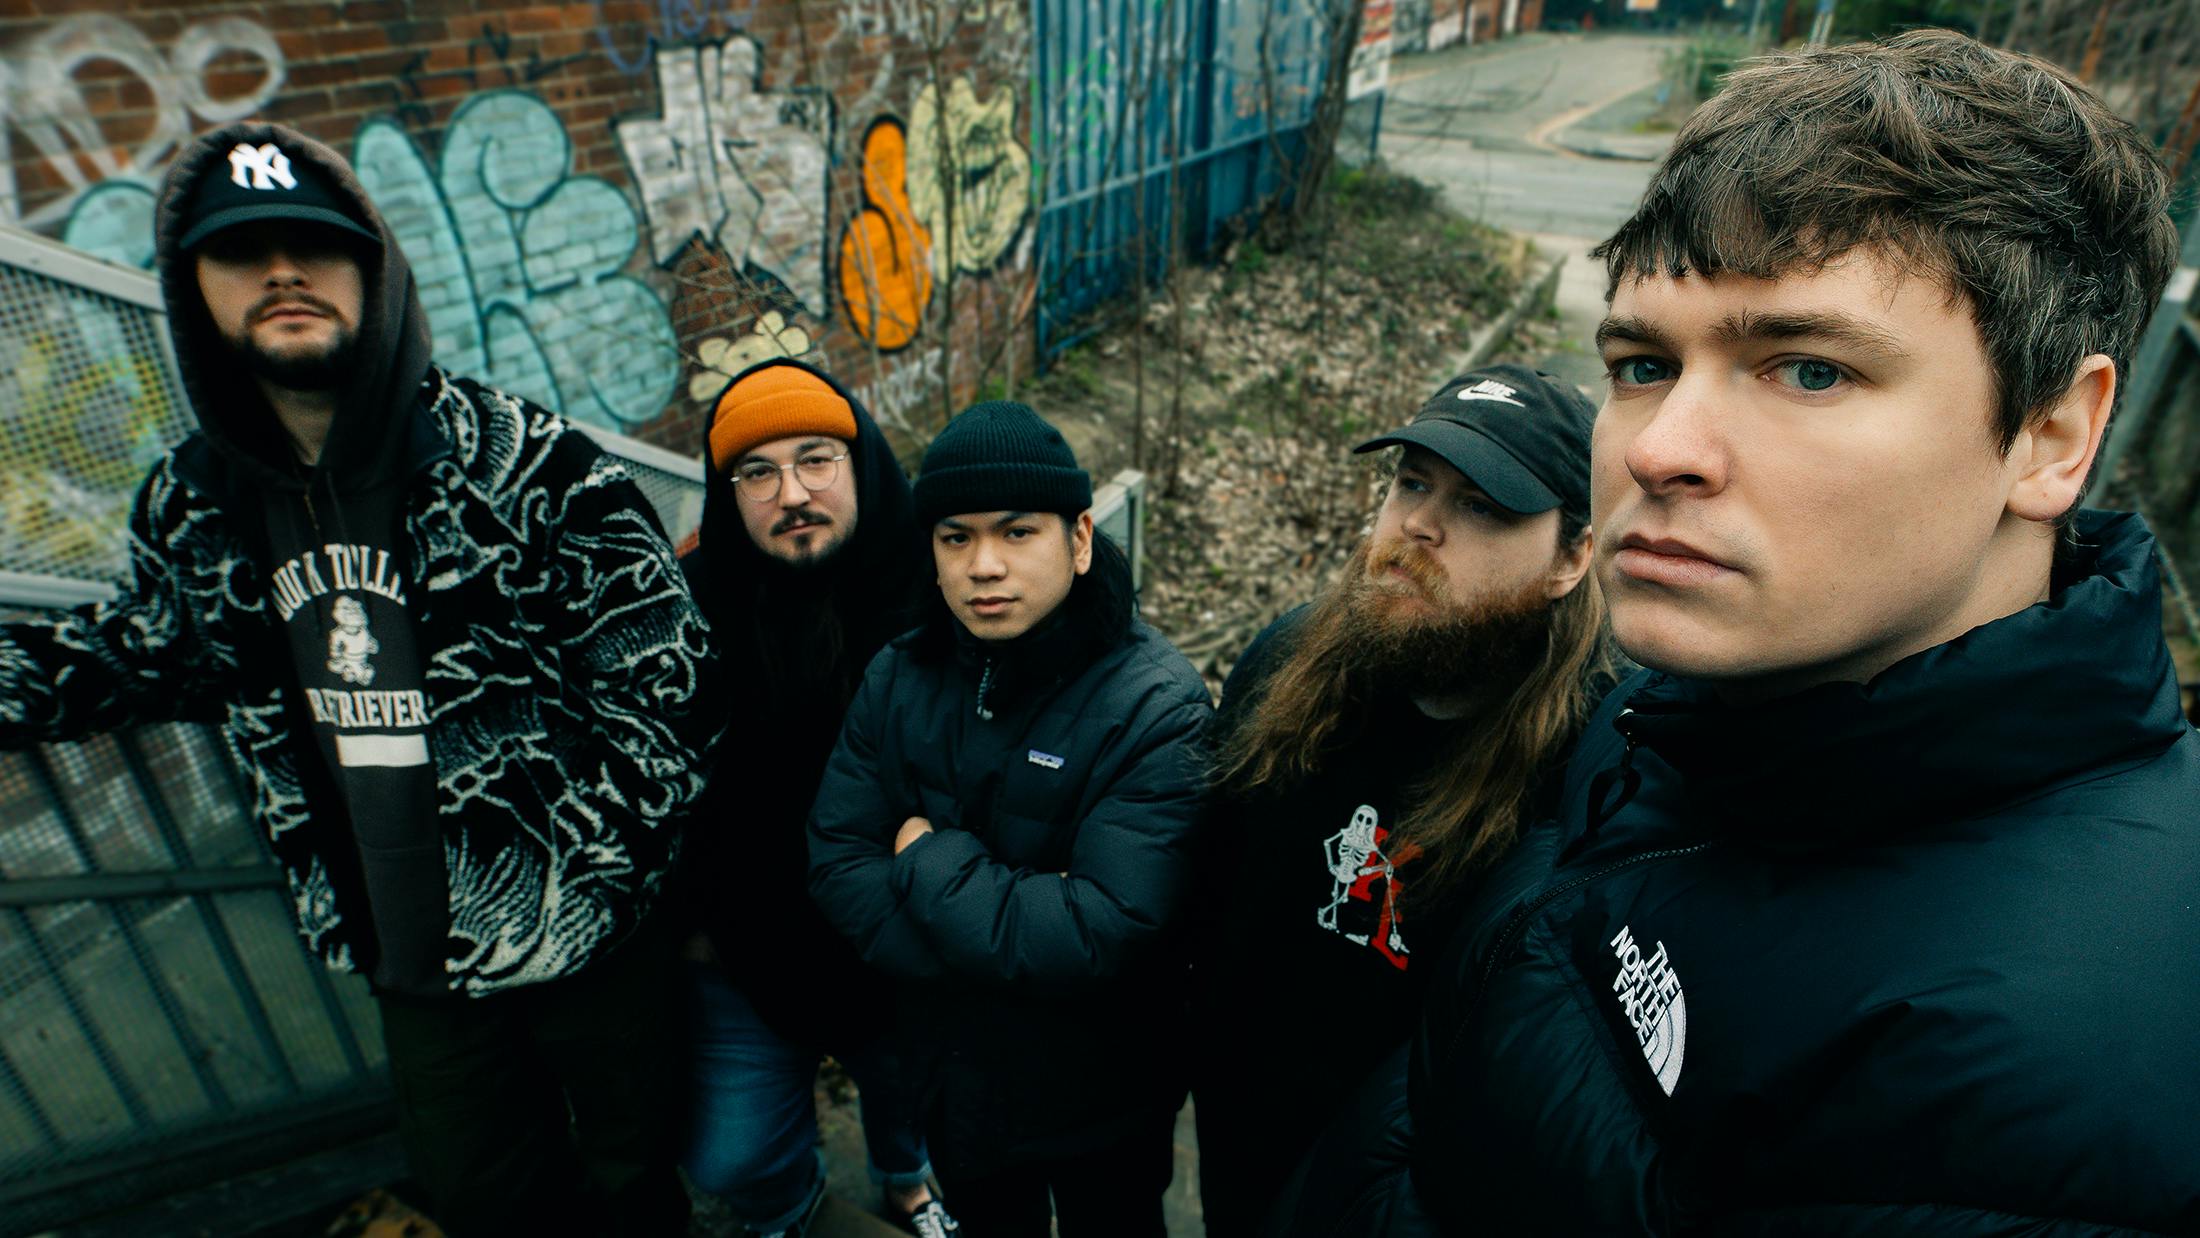 Knocked Loose: “Sacrificing heaviness was never an option… As this band grows, it only gets more uncomfortable and extreme”